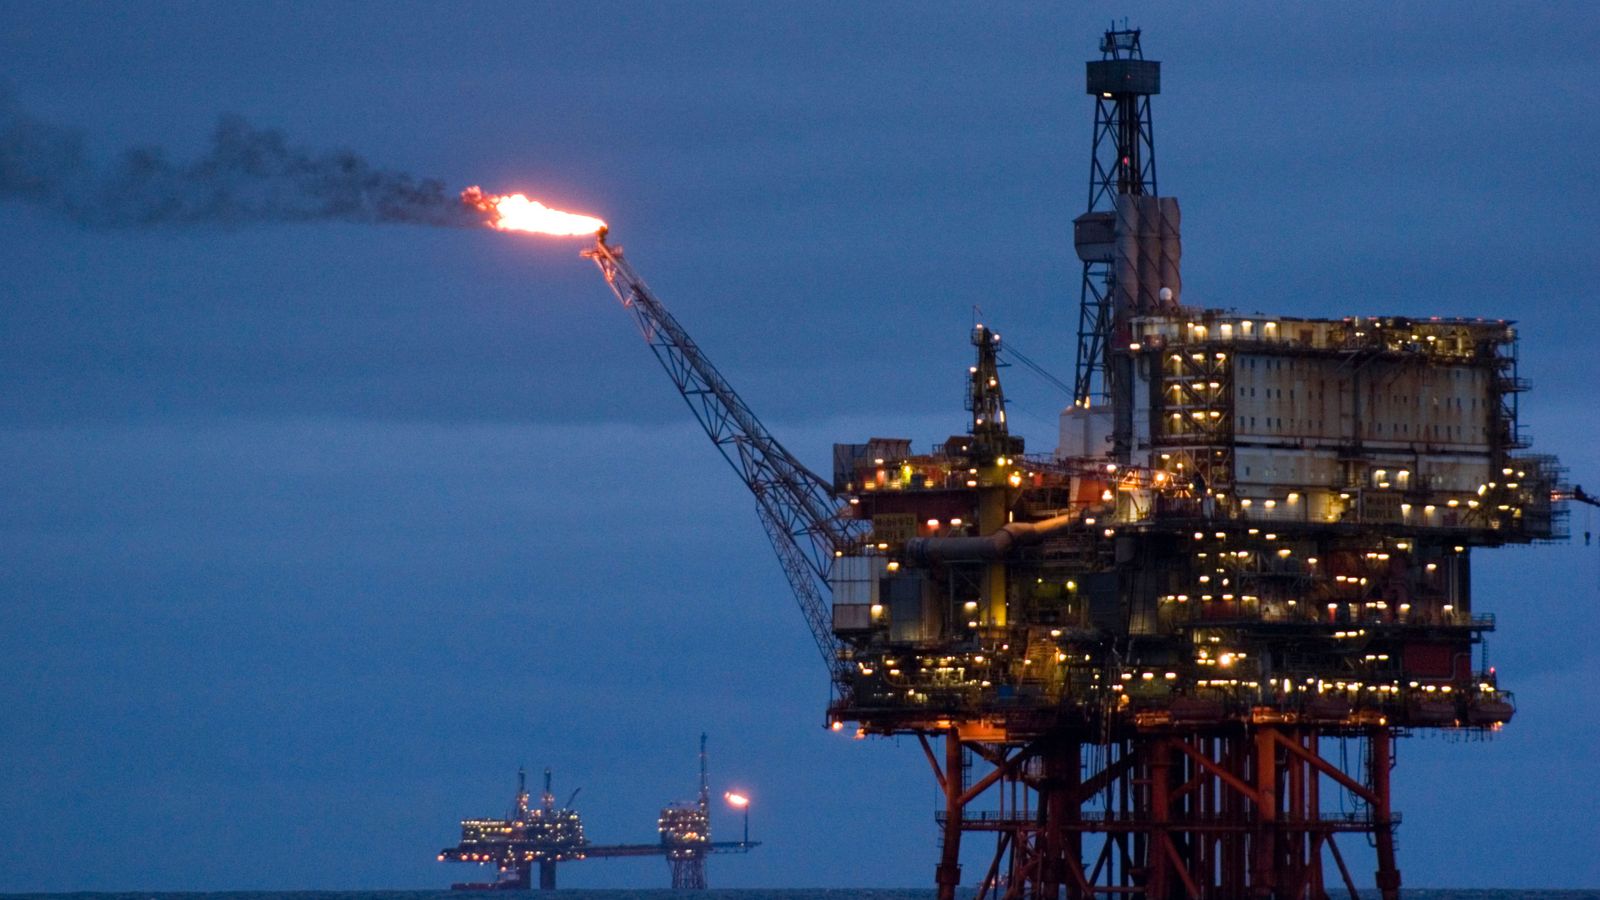 Labour's North Sea oil and gas policy under attack from industry and activists